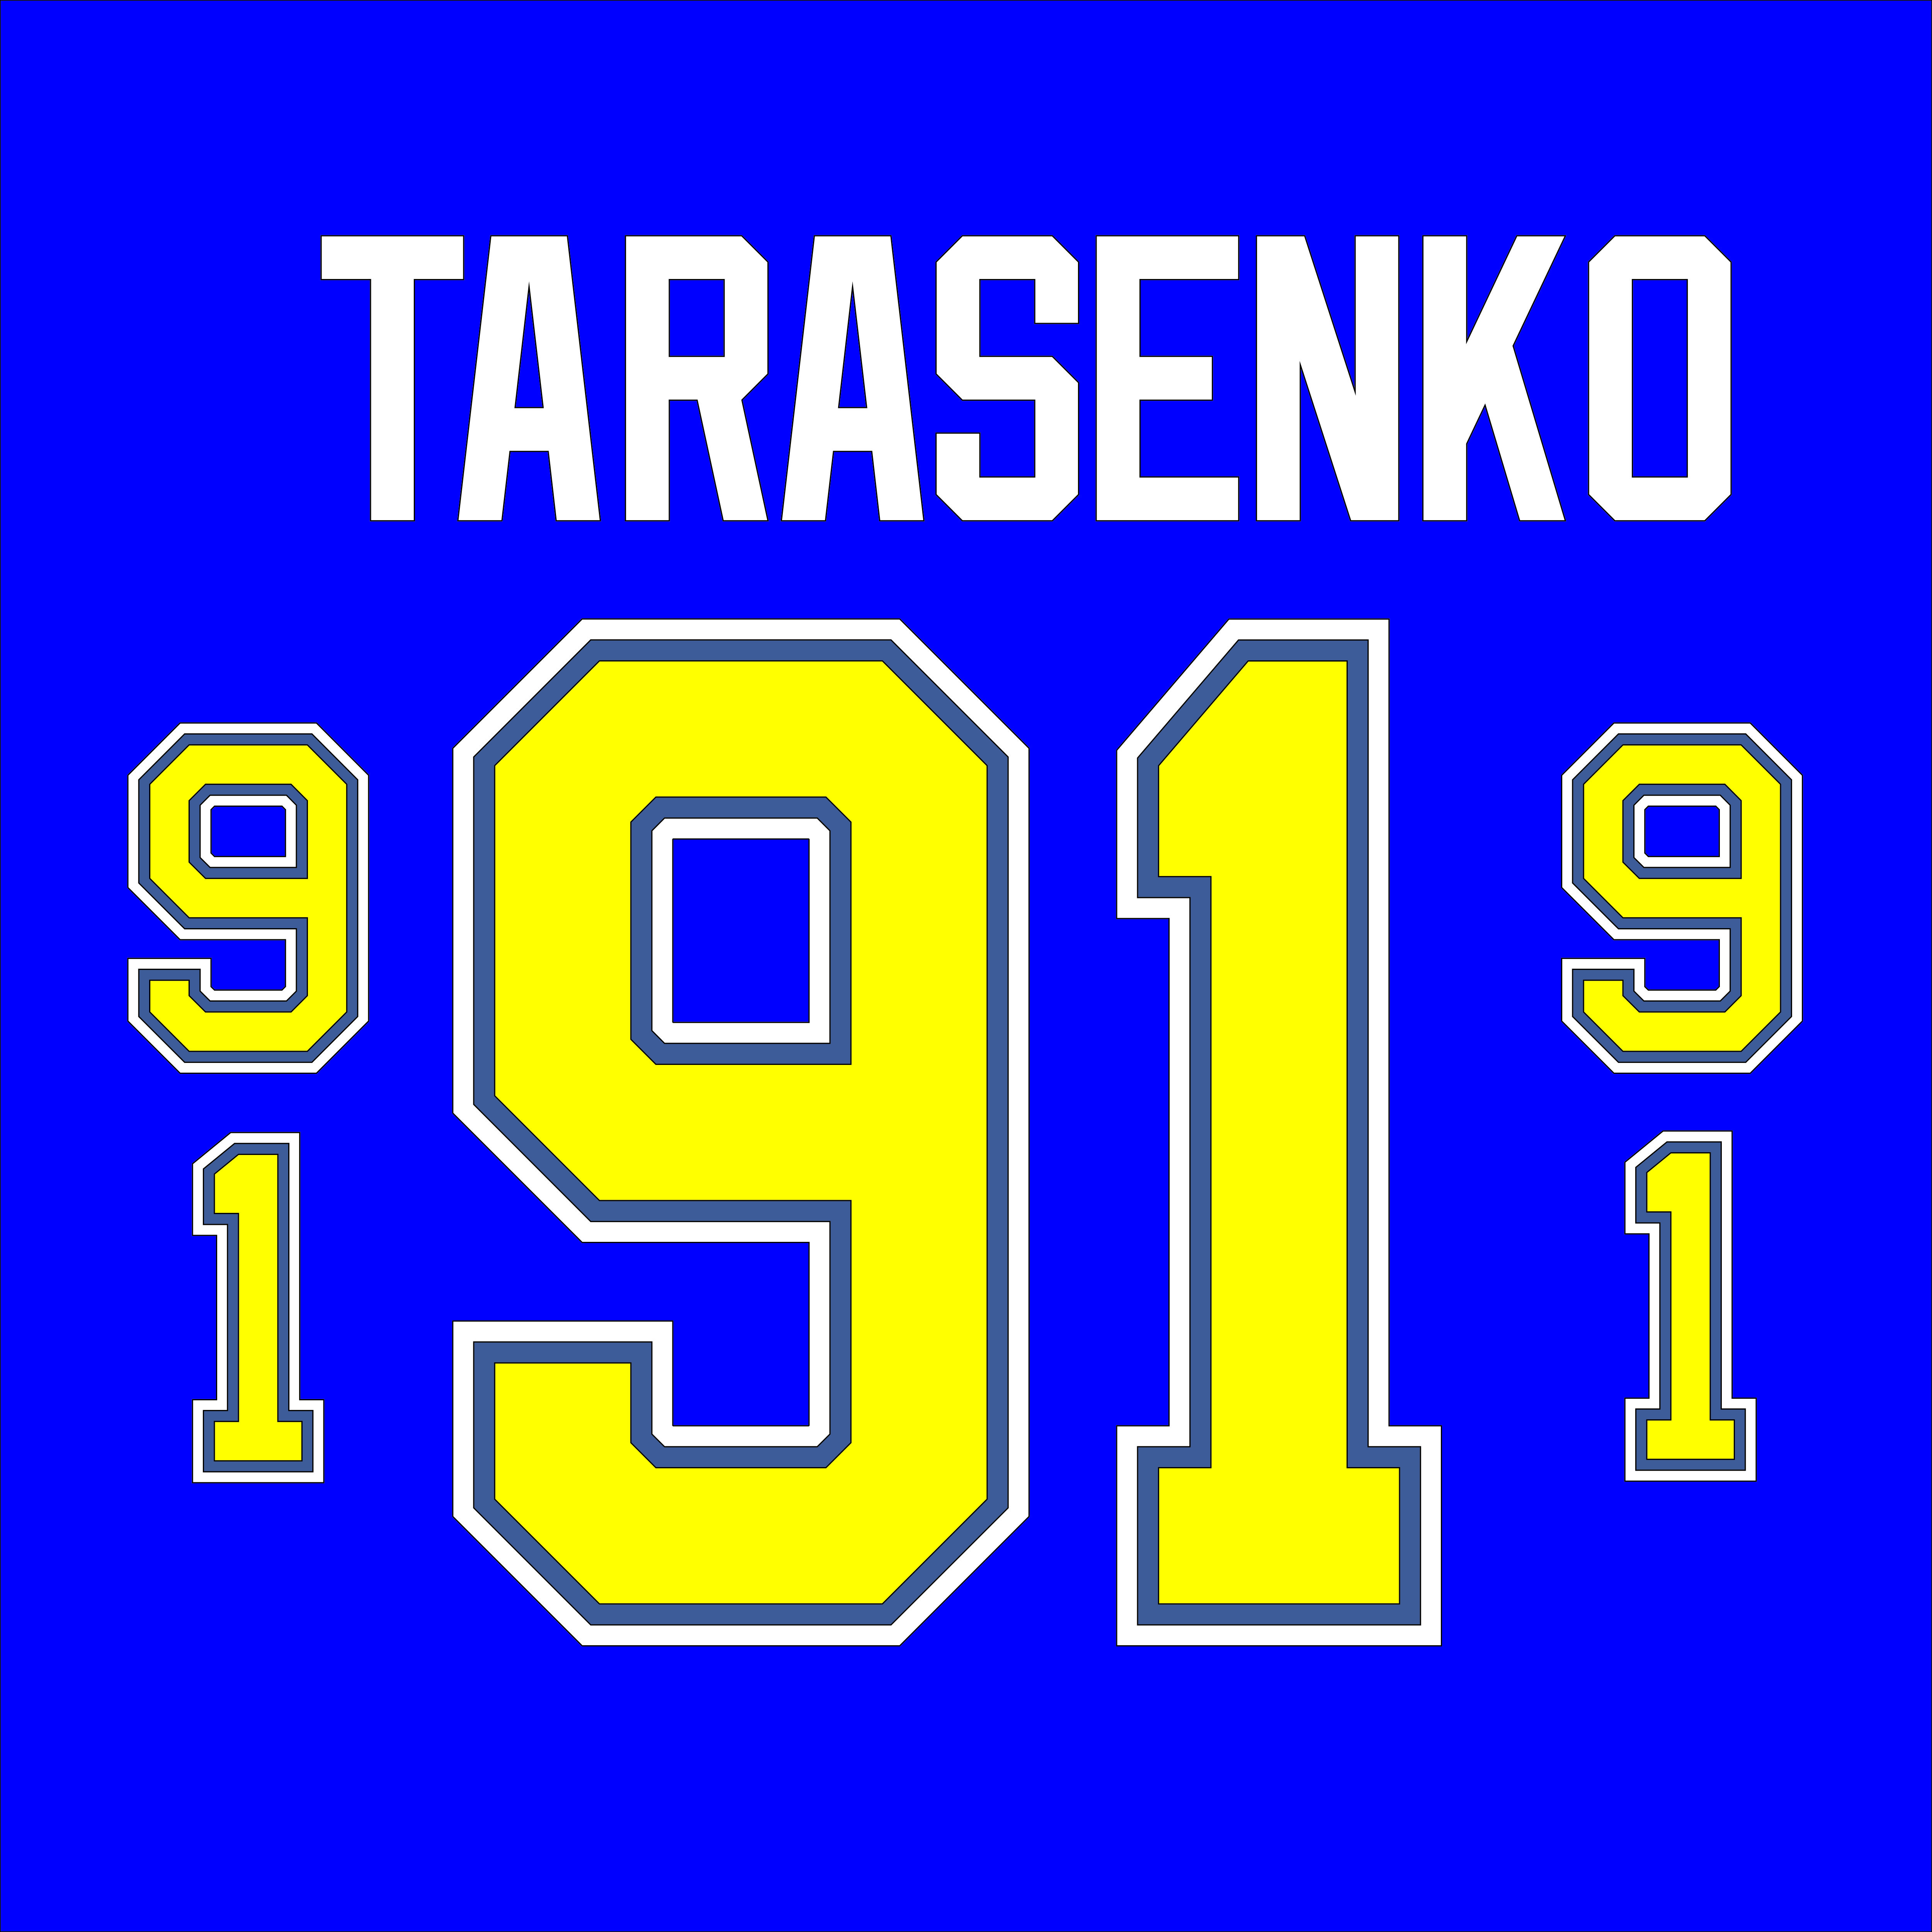 st louis blues jersey numbers off 63 